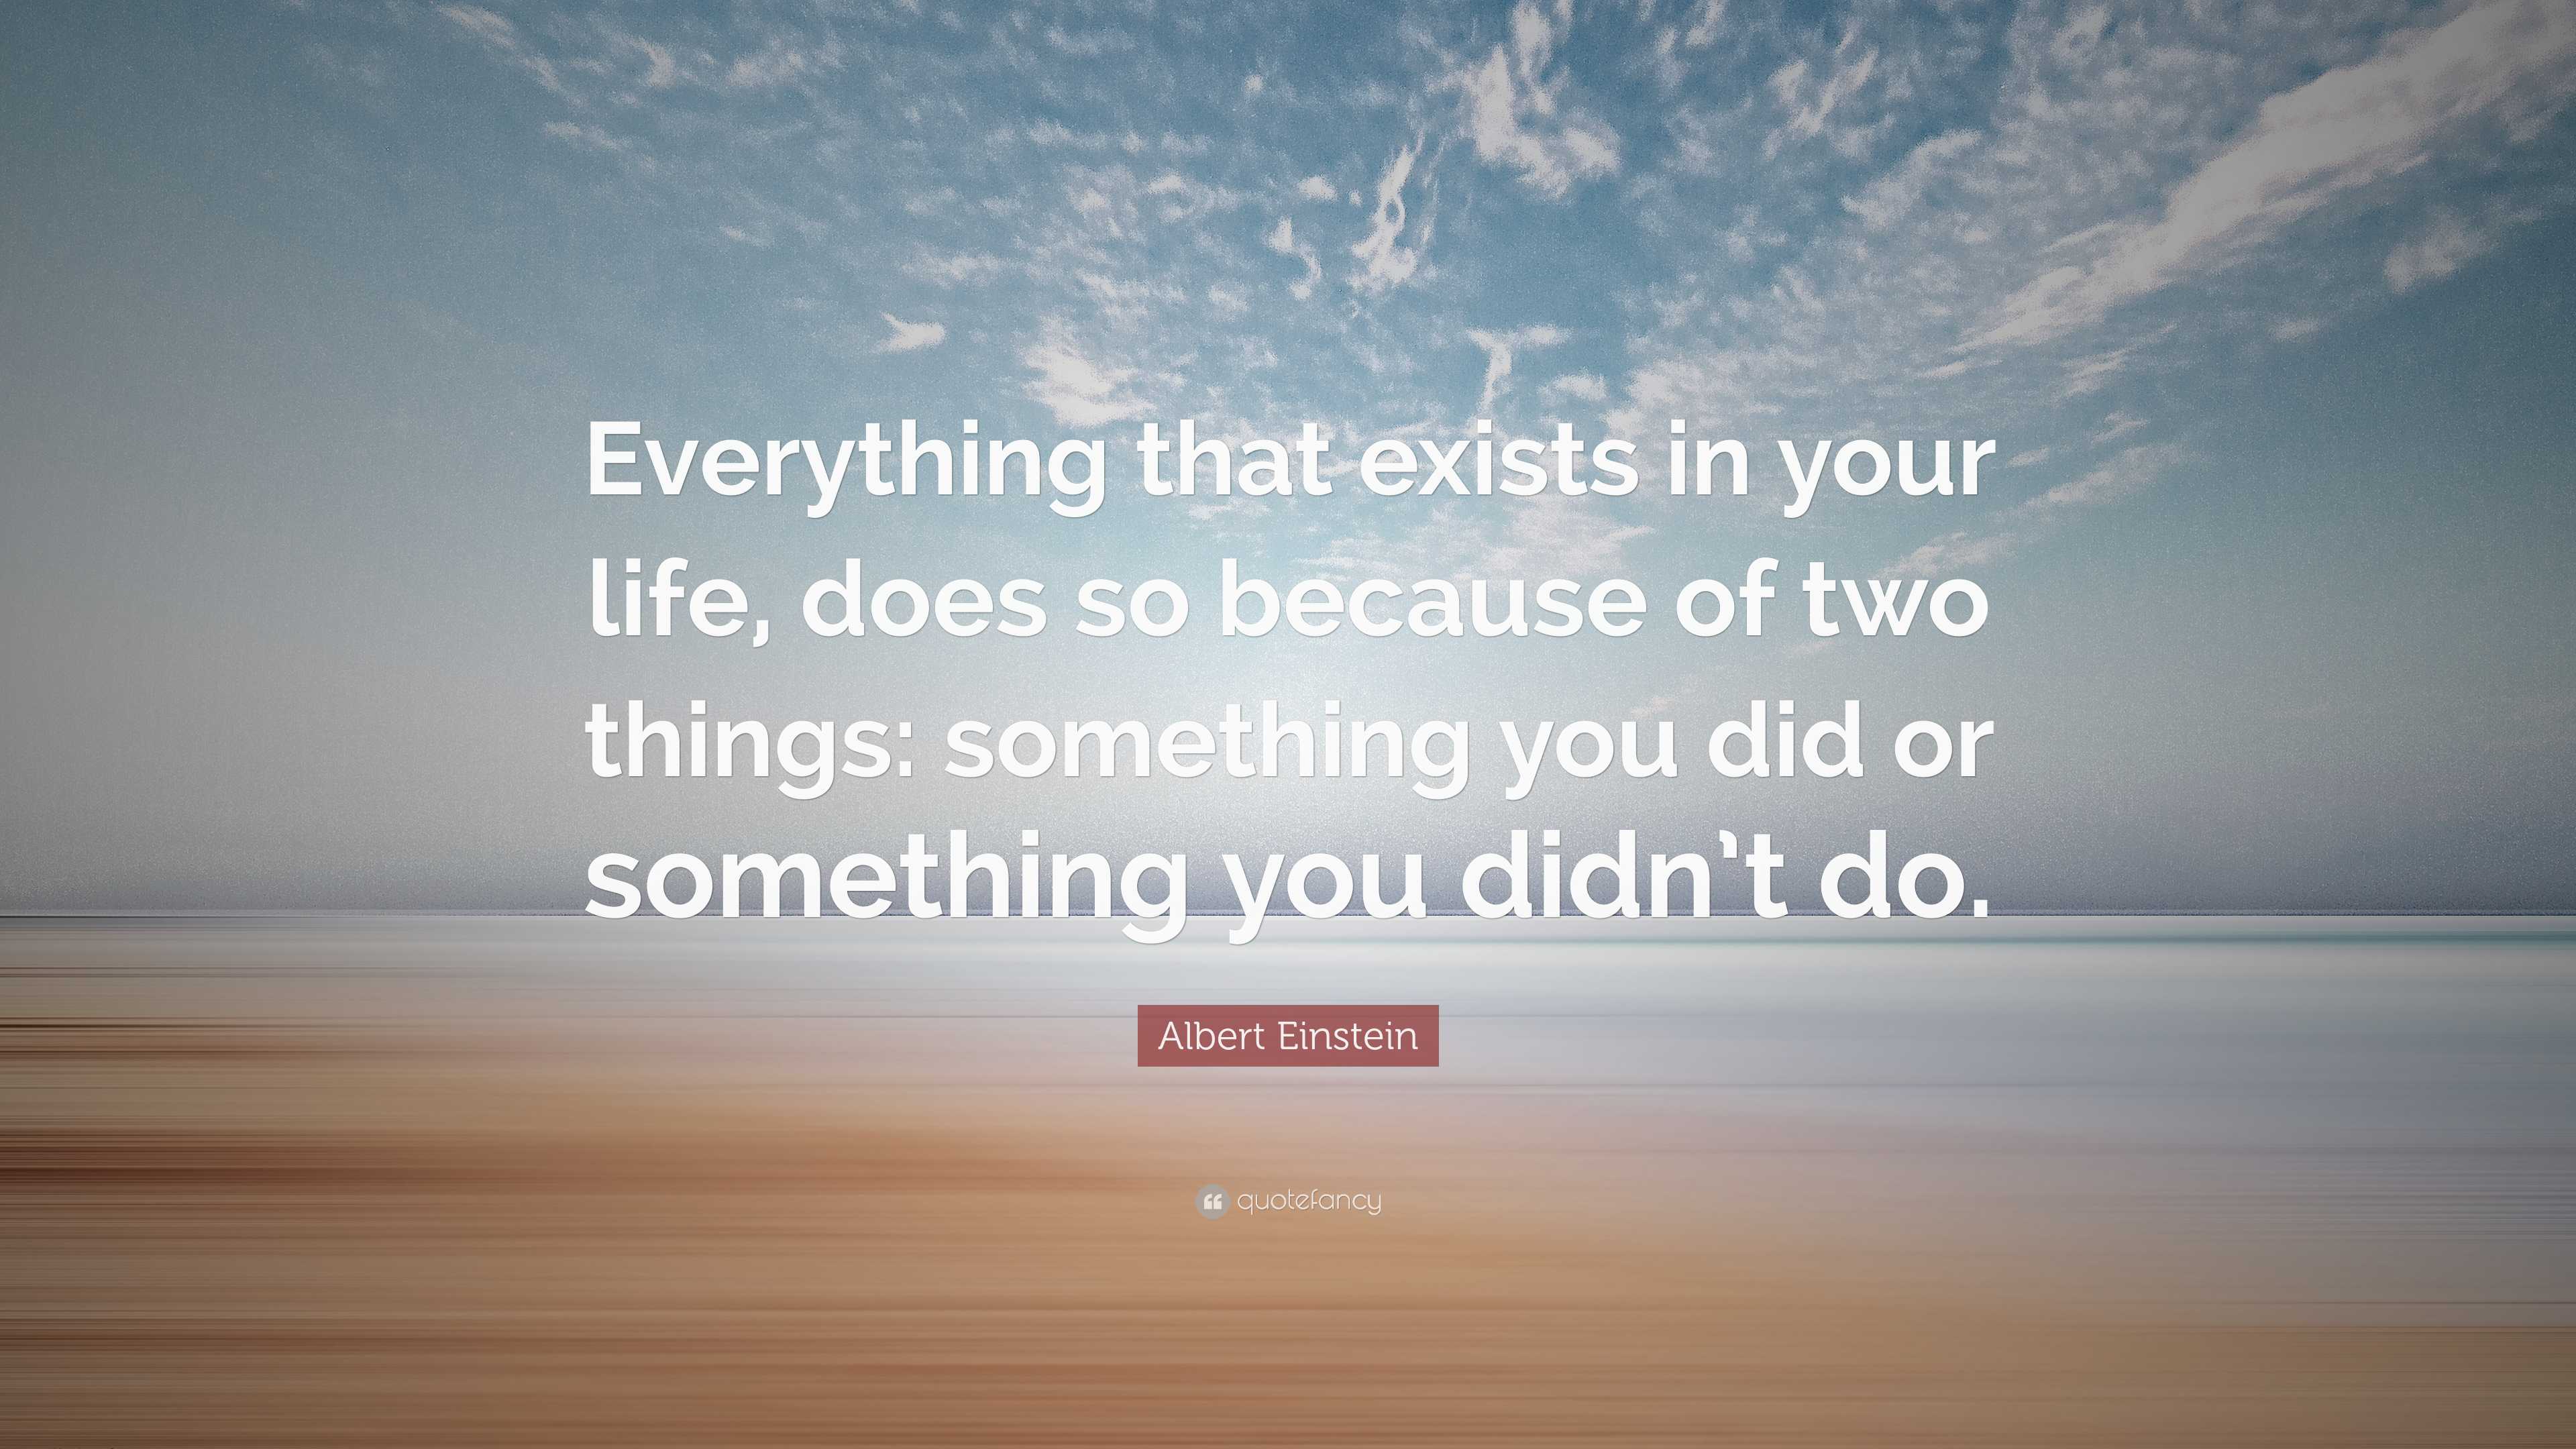 Albert Einstein Quote: “Everything that exists in your life, does so ...